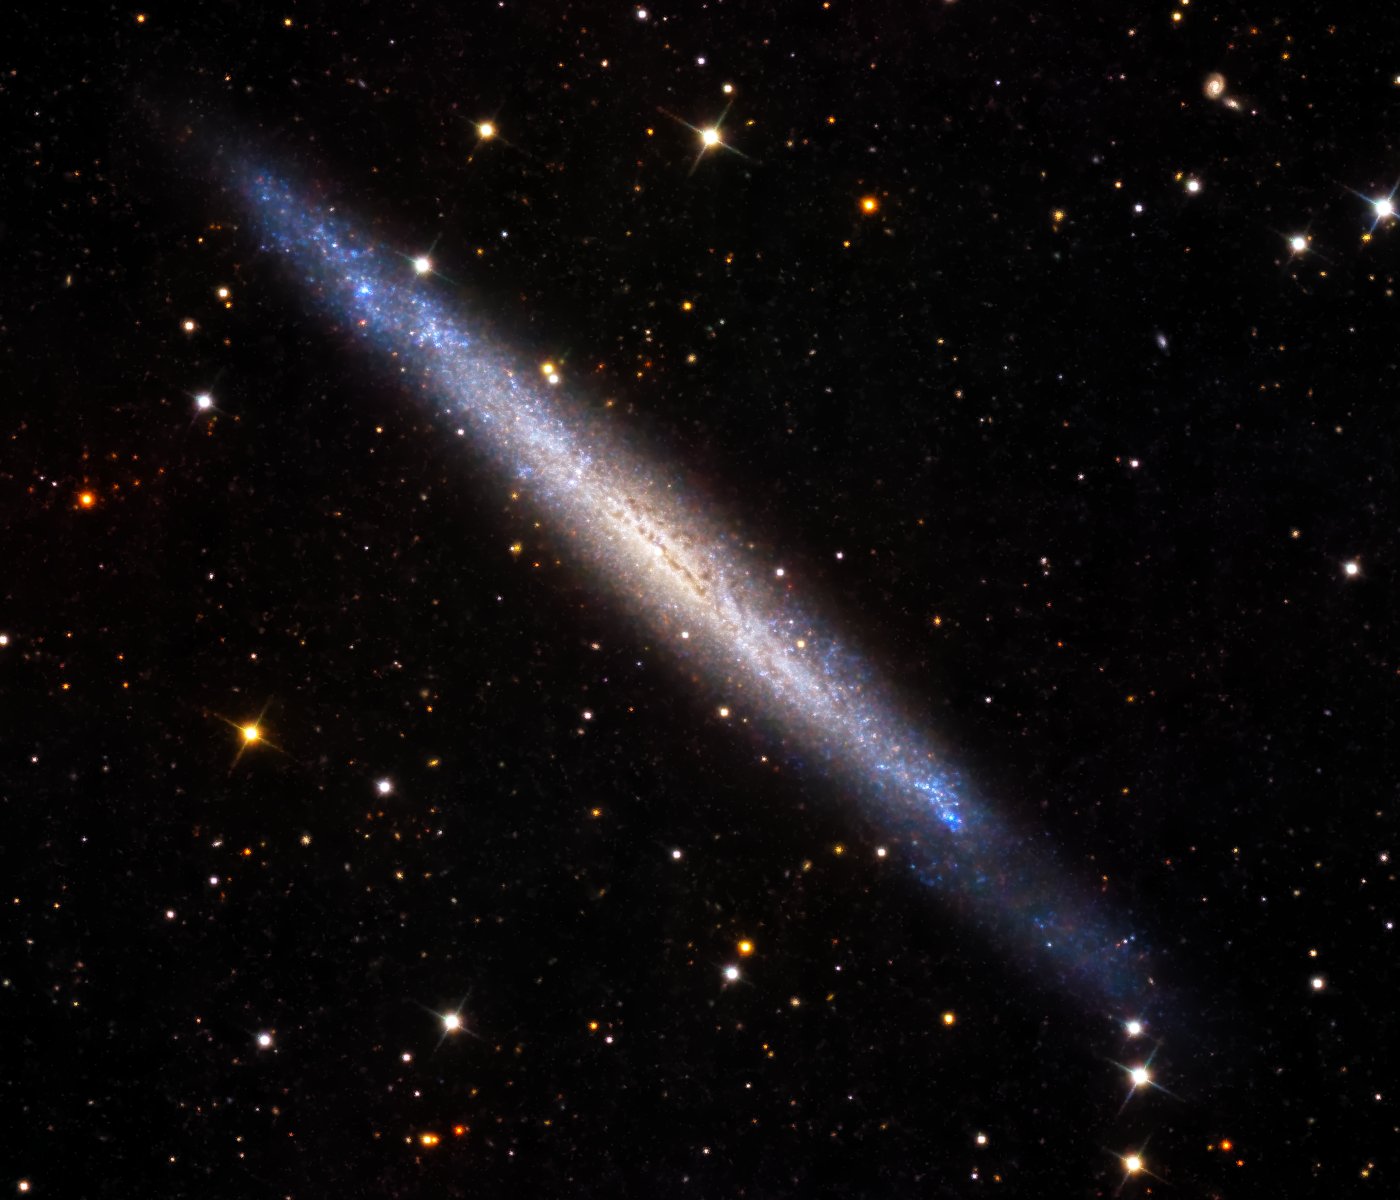 NGC 4244 (Caldwell 66) in continuum light